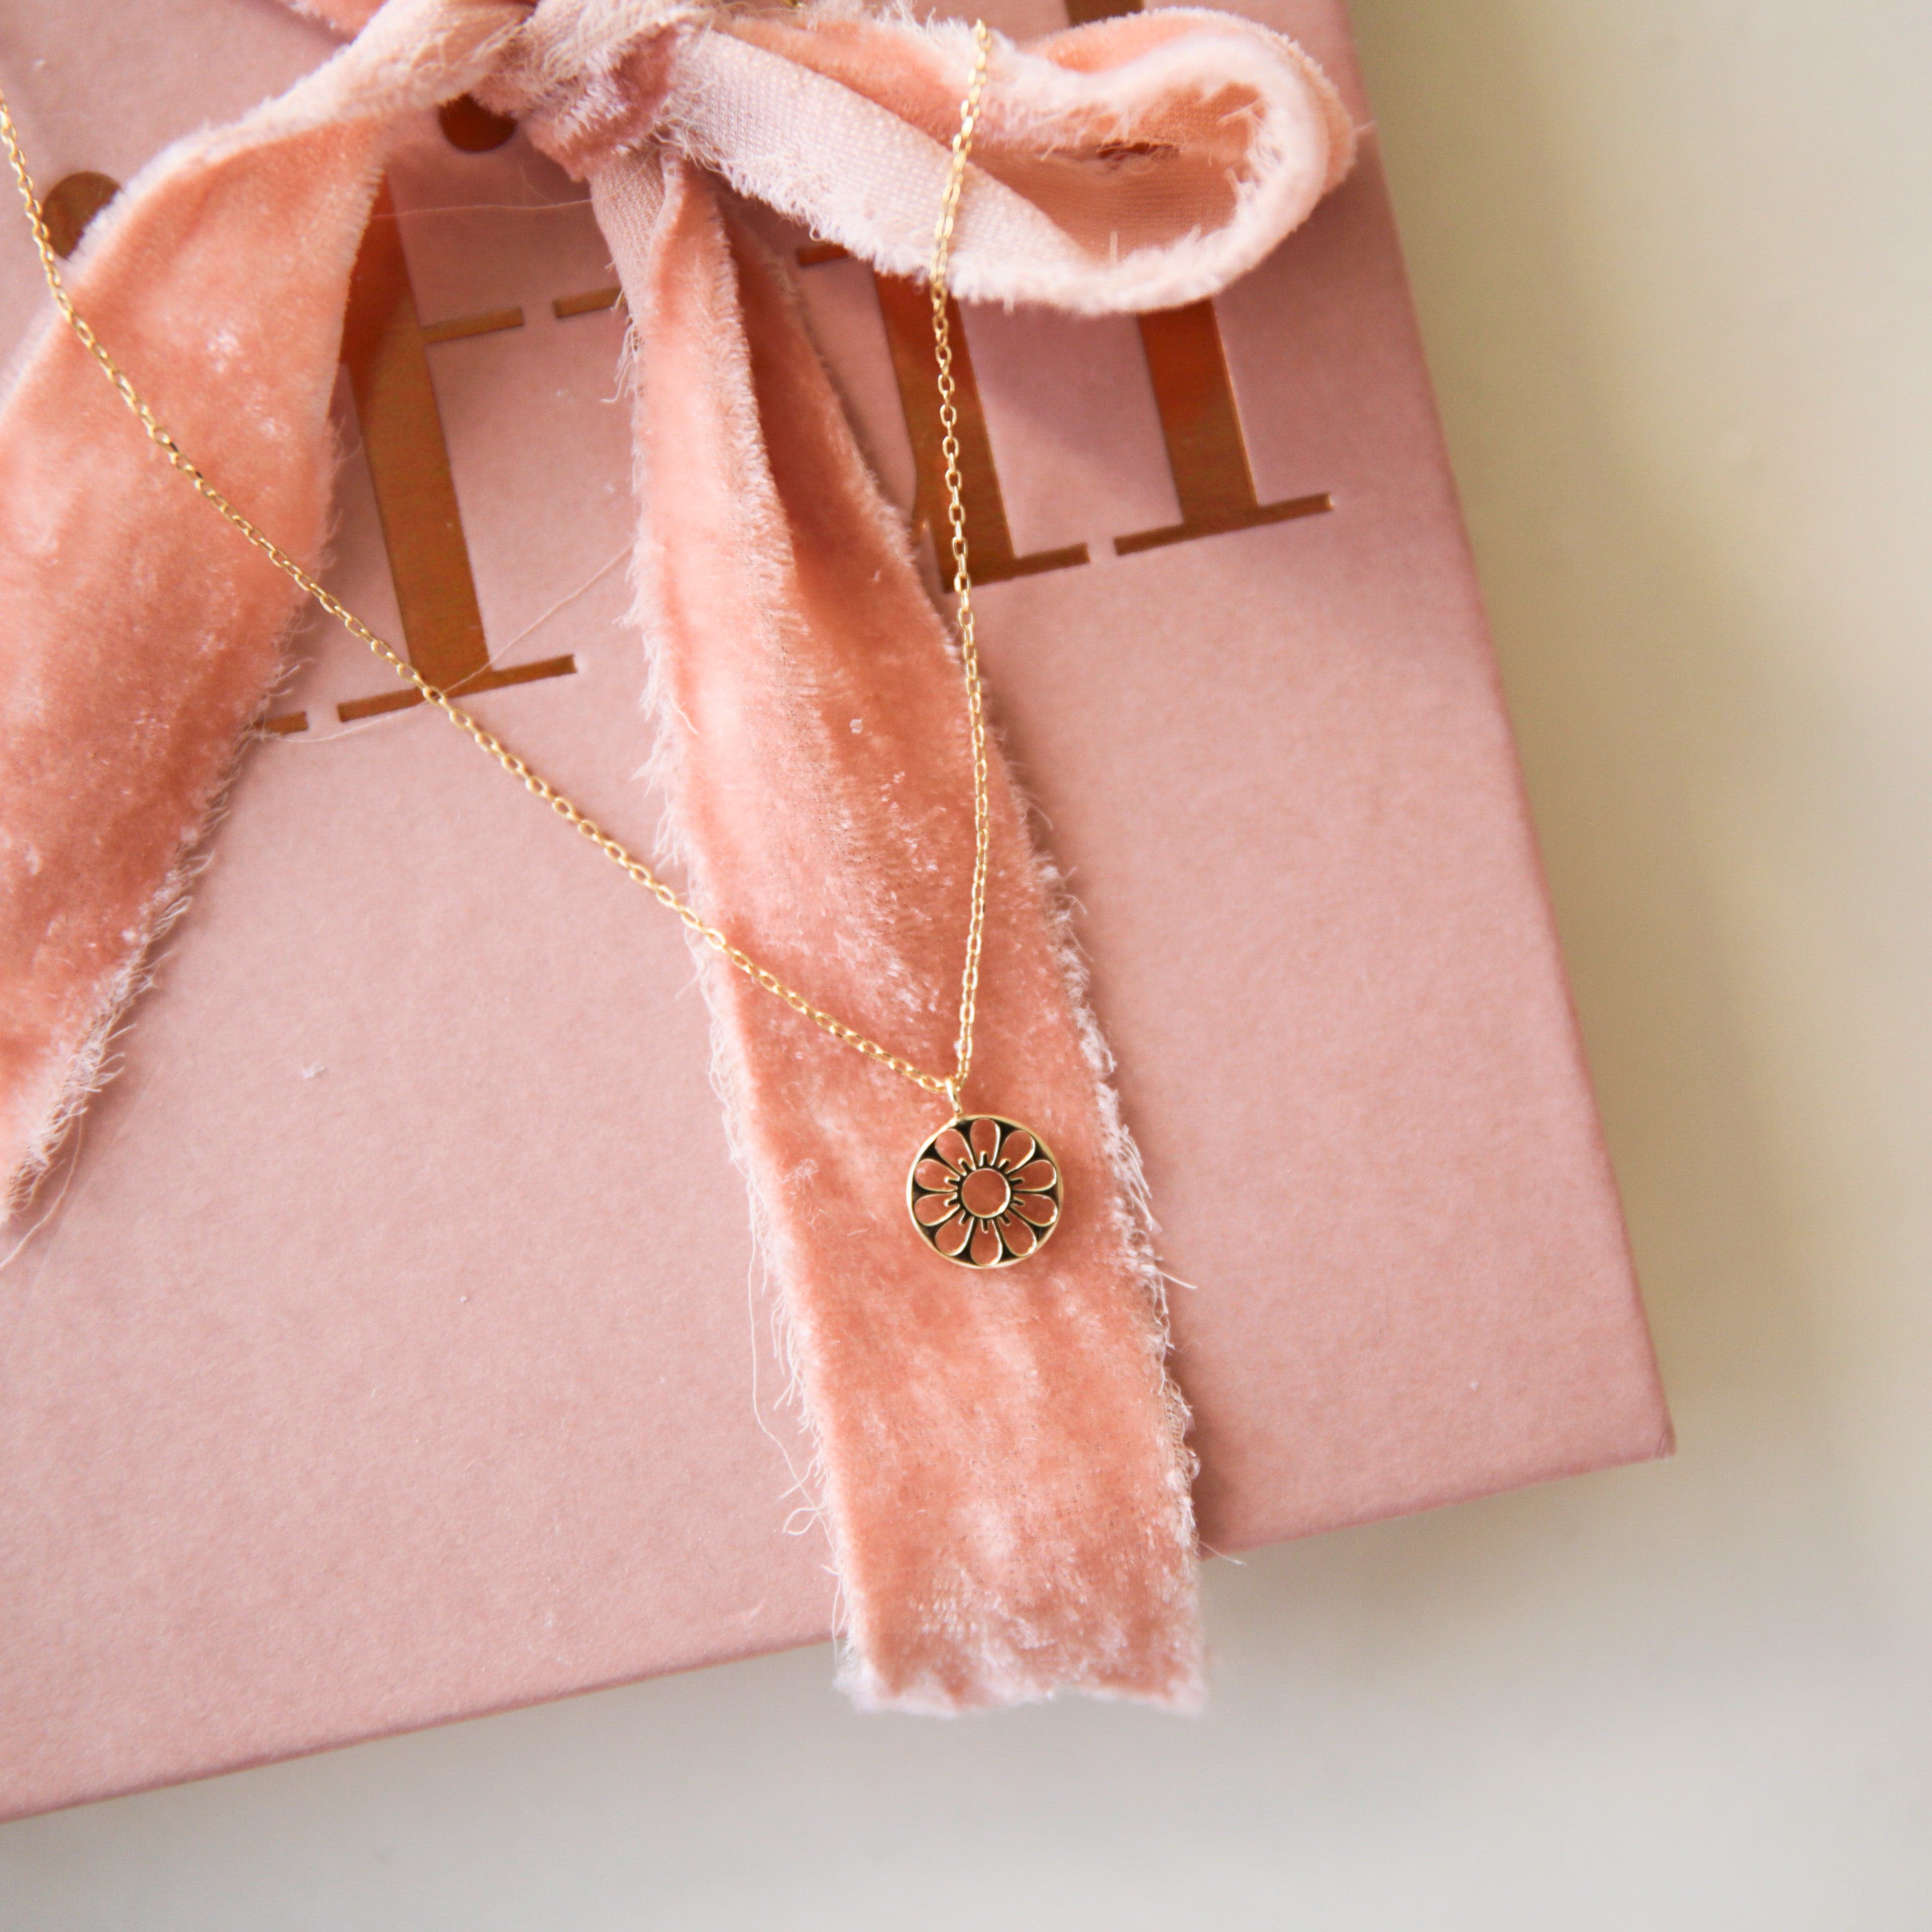 A dainty gold chain necklace with a gold circle pendant in the center with a cut out of a daisy flower, photographed on a pink book with a textured pink ribbon.